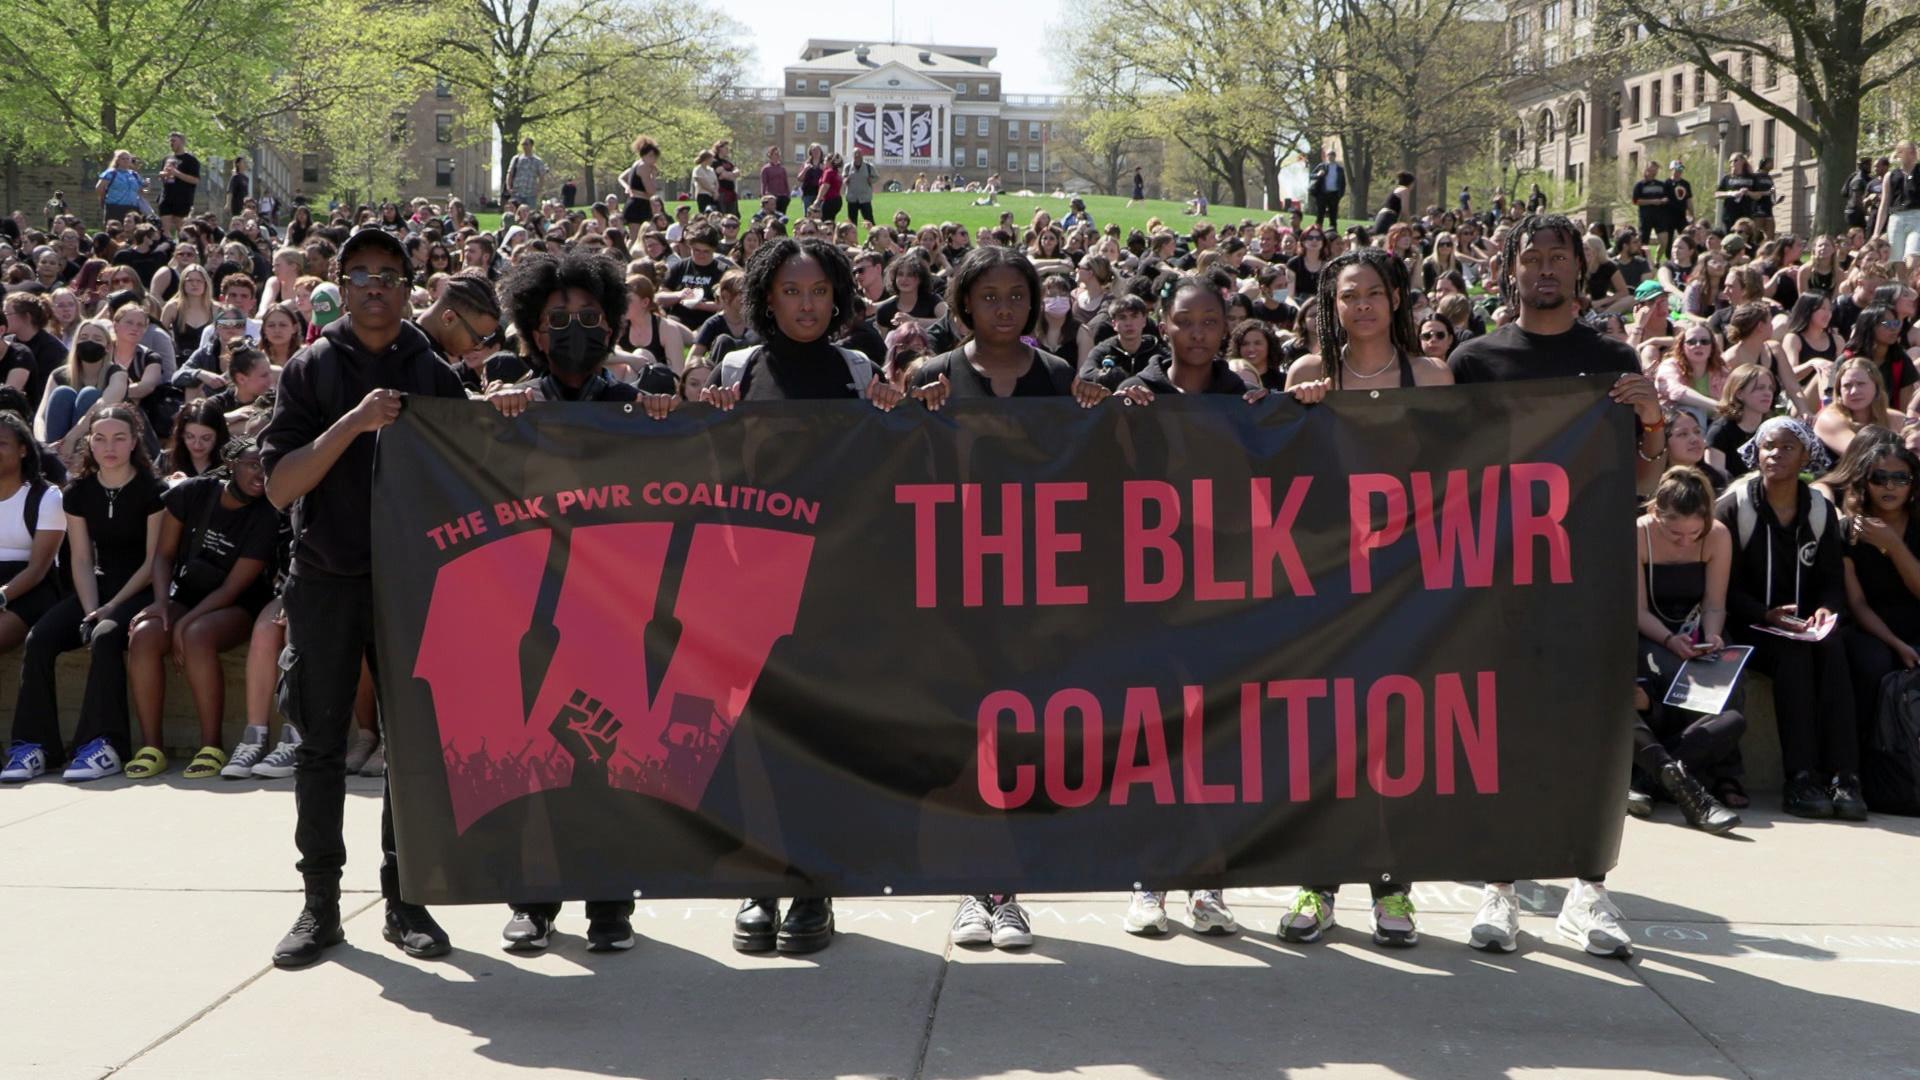 Blk Pwr Coalition responds to racism from UW-Madison student